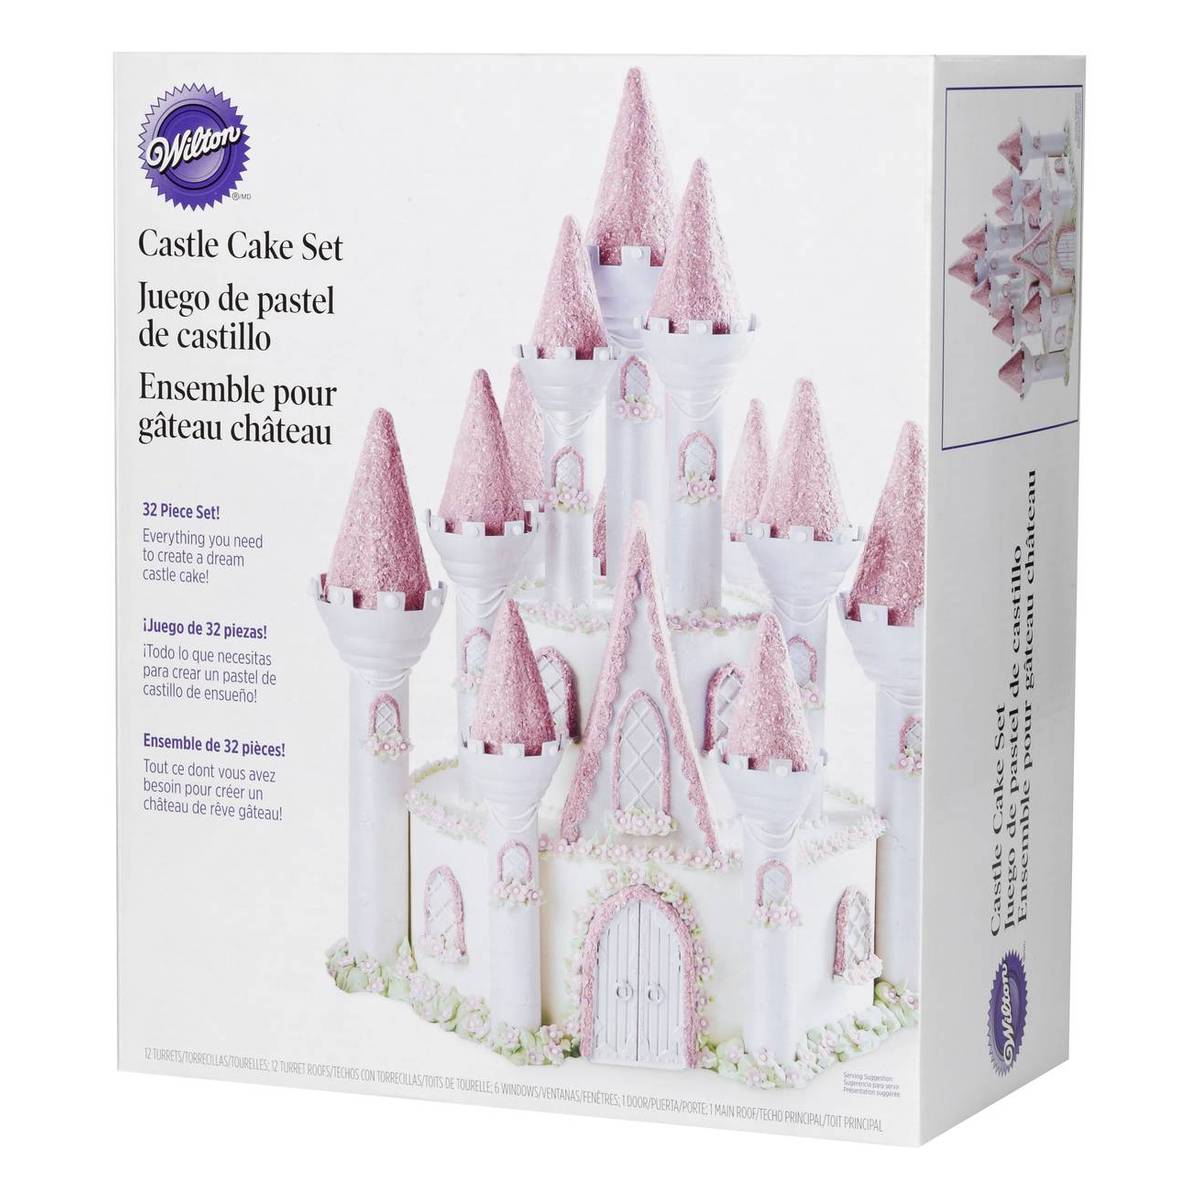 Dolls House Cakes and Slices - Dolls House Miniature 3 Tier Princess Castle  Cake | Product Code 11666 | Price From 0.00